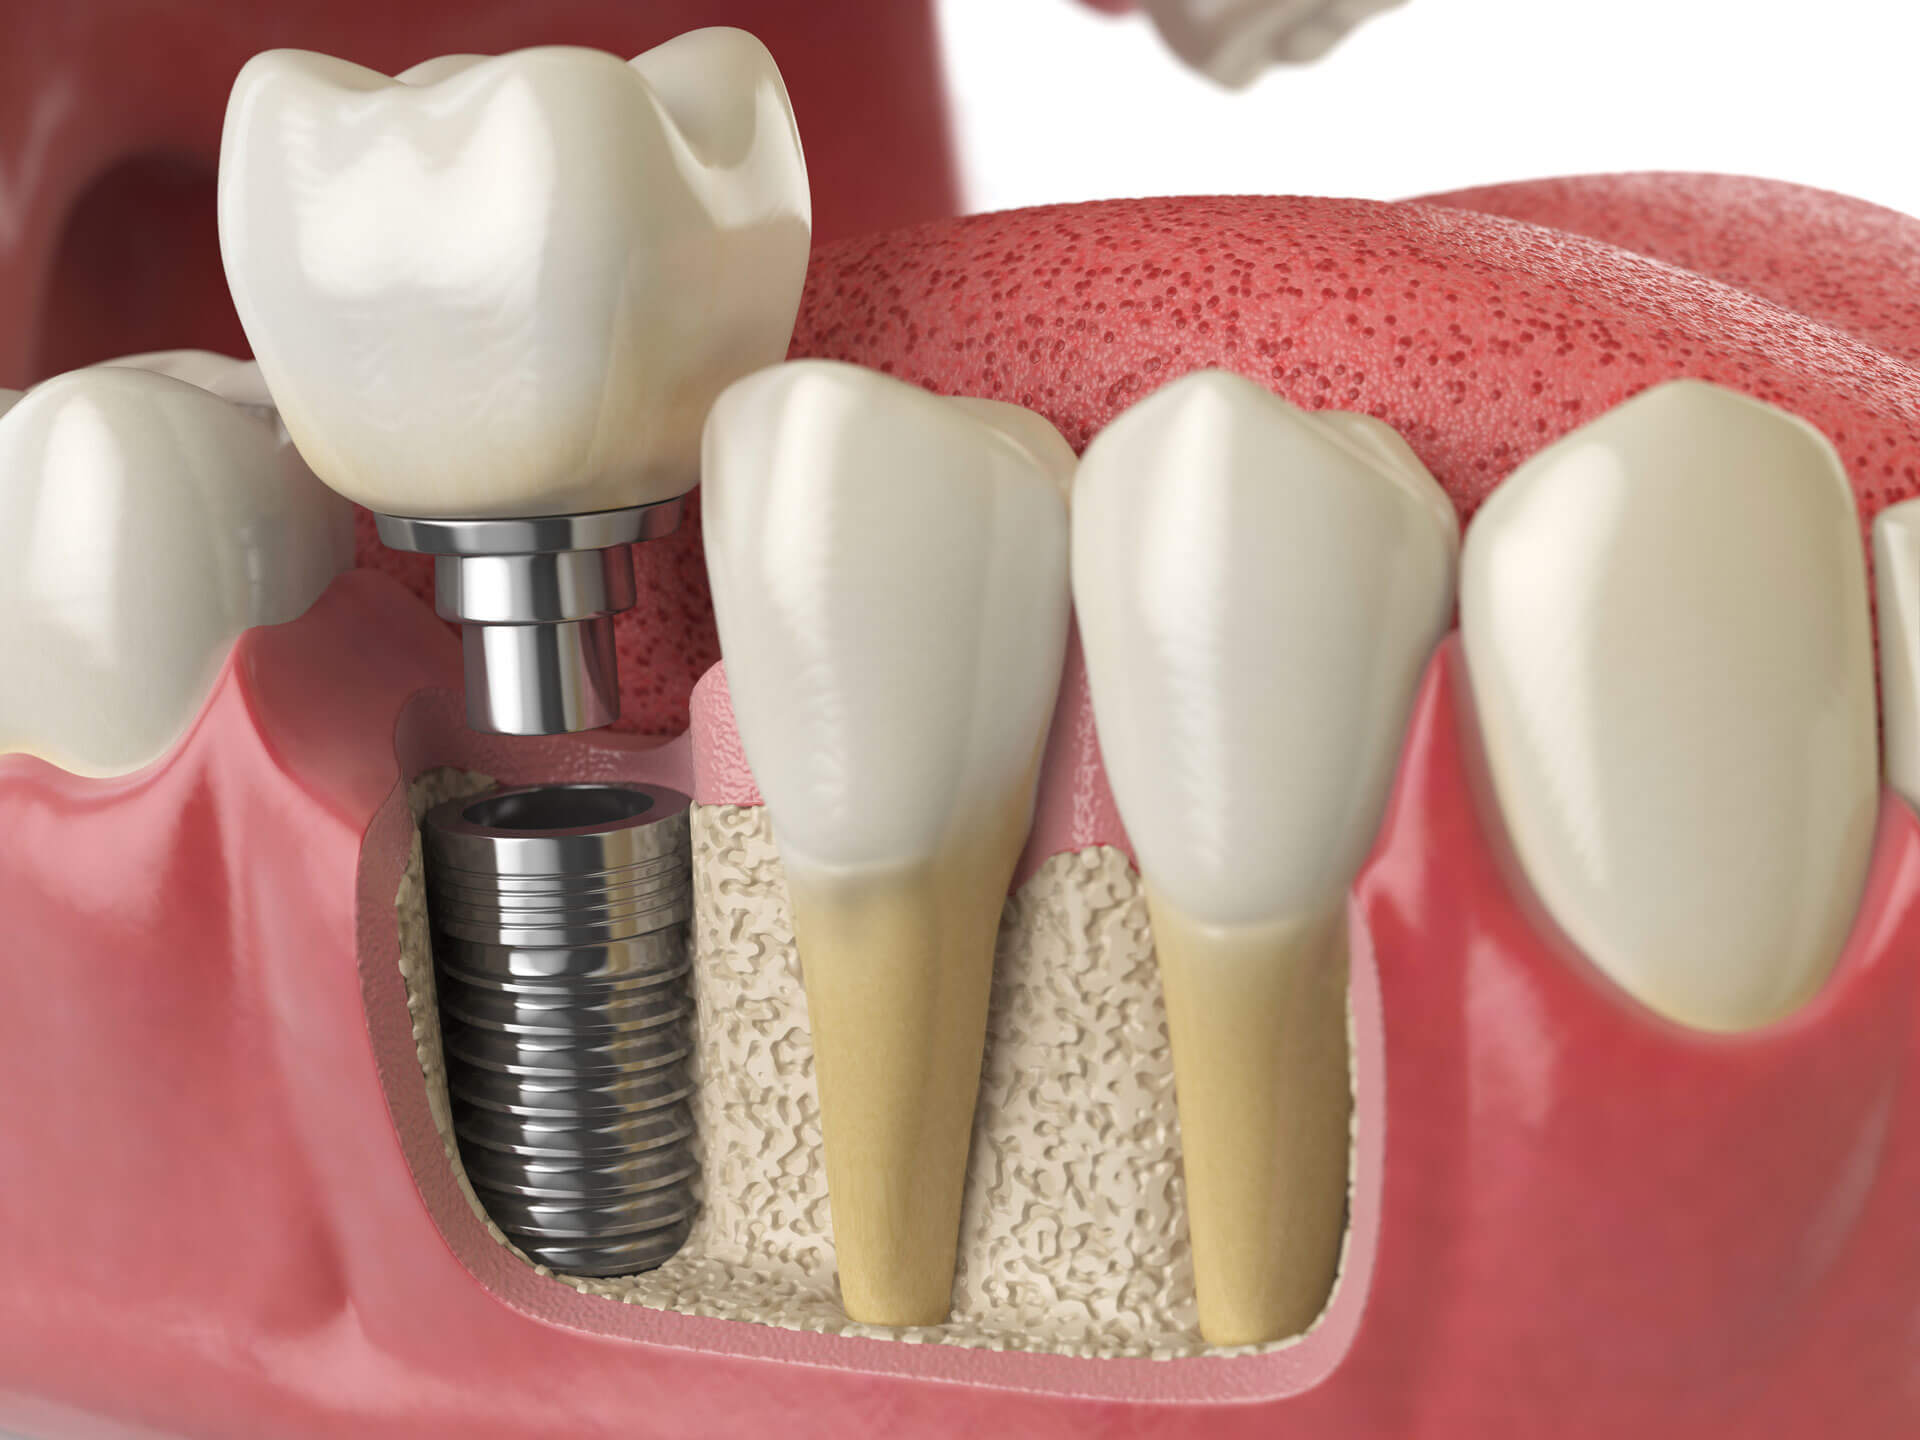 Implant dentaire : comment peut-on s'y adapter ?